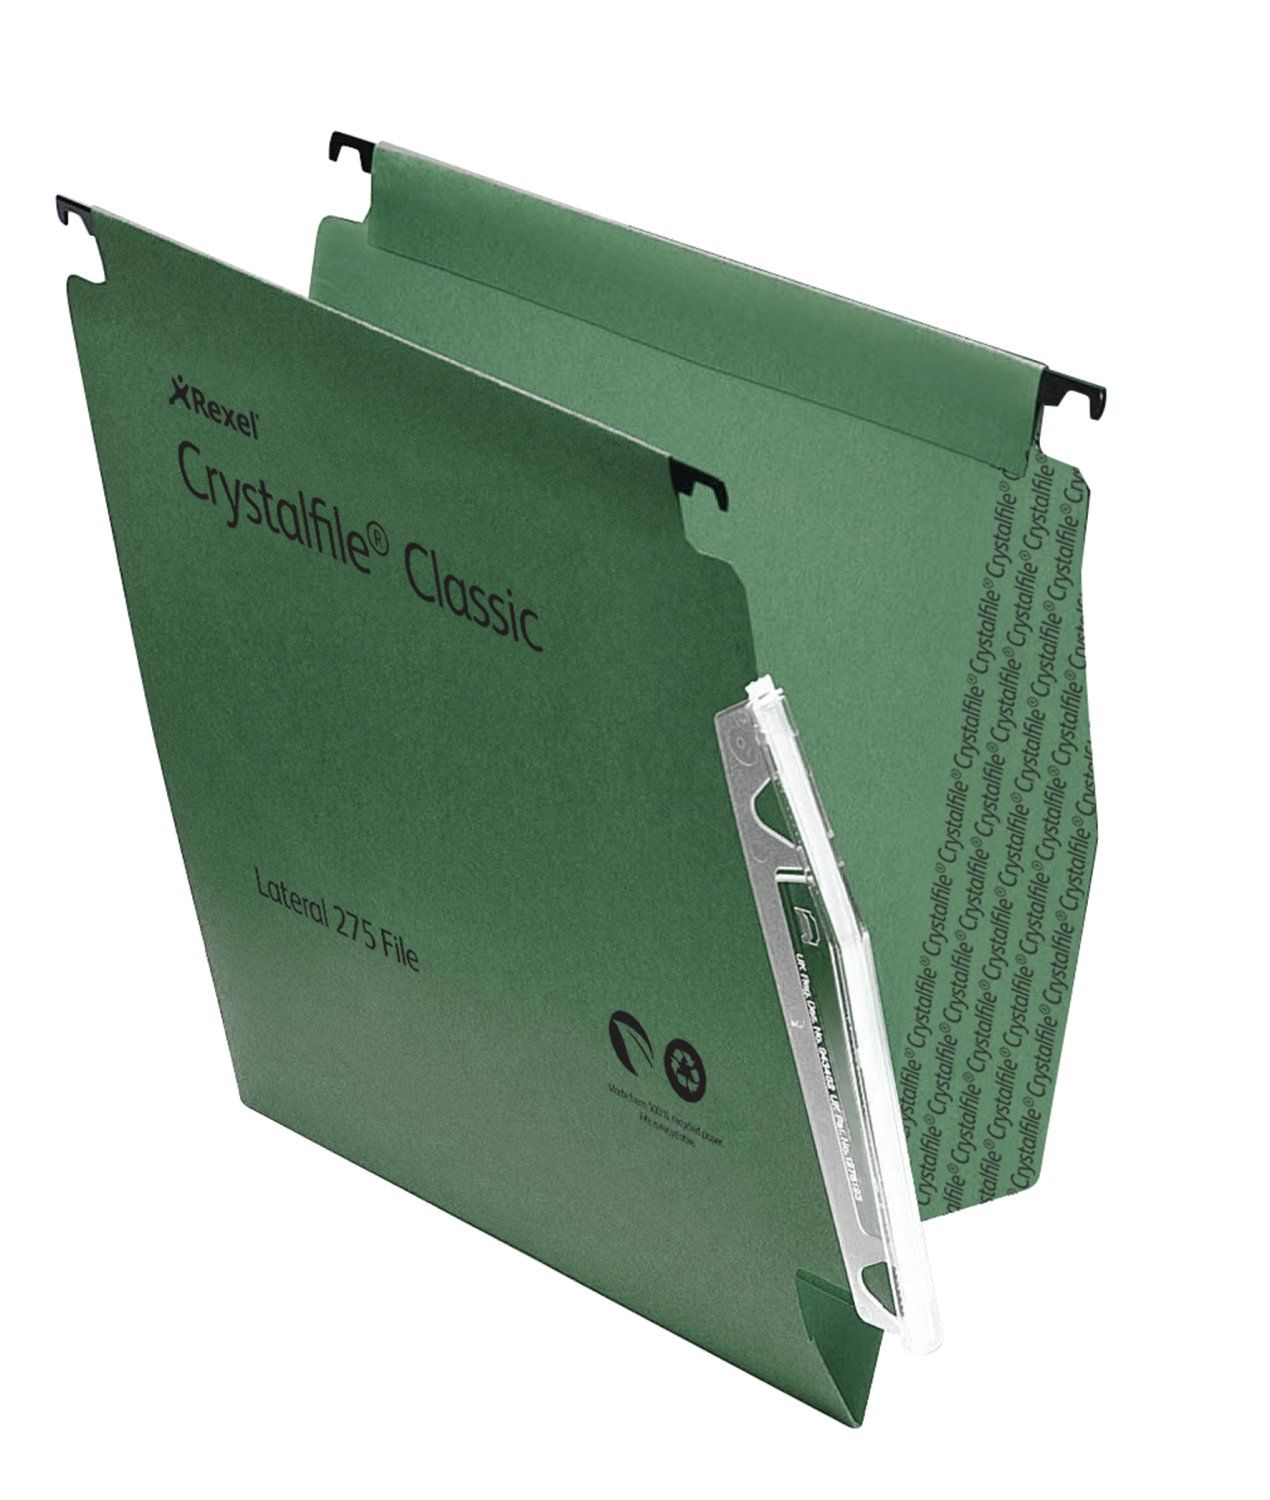 Rexel Crystalfile Classic 275 Foolscap Lateral Suspension File Manilla 15mm V Base Green (Pack 50)